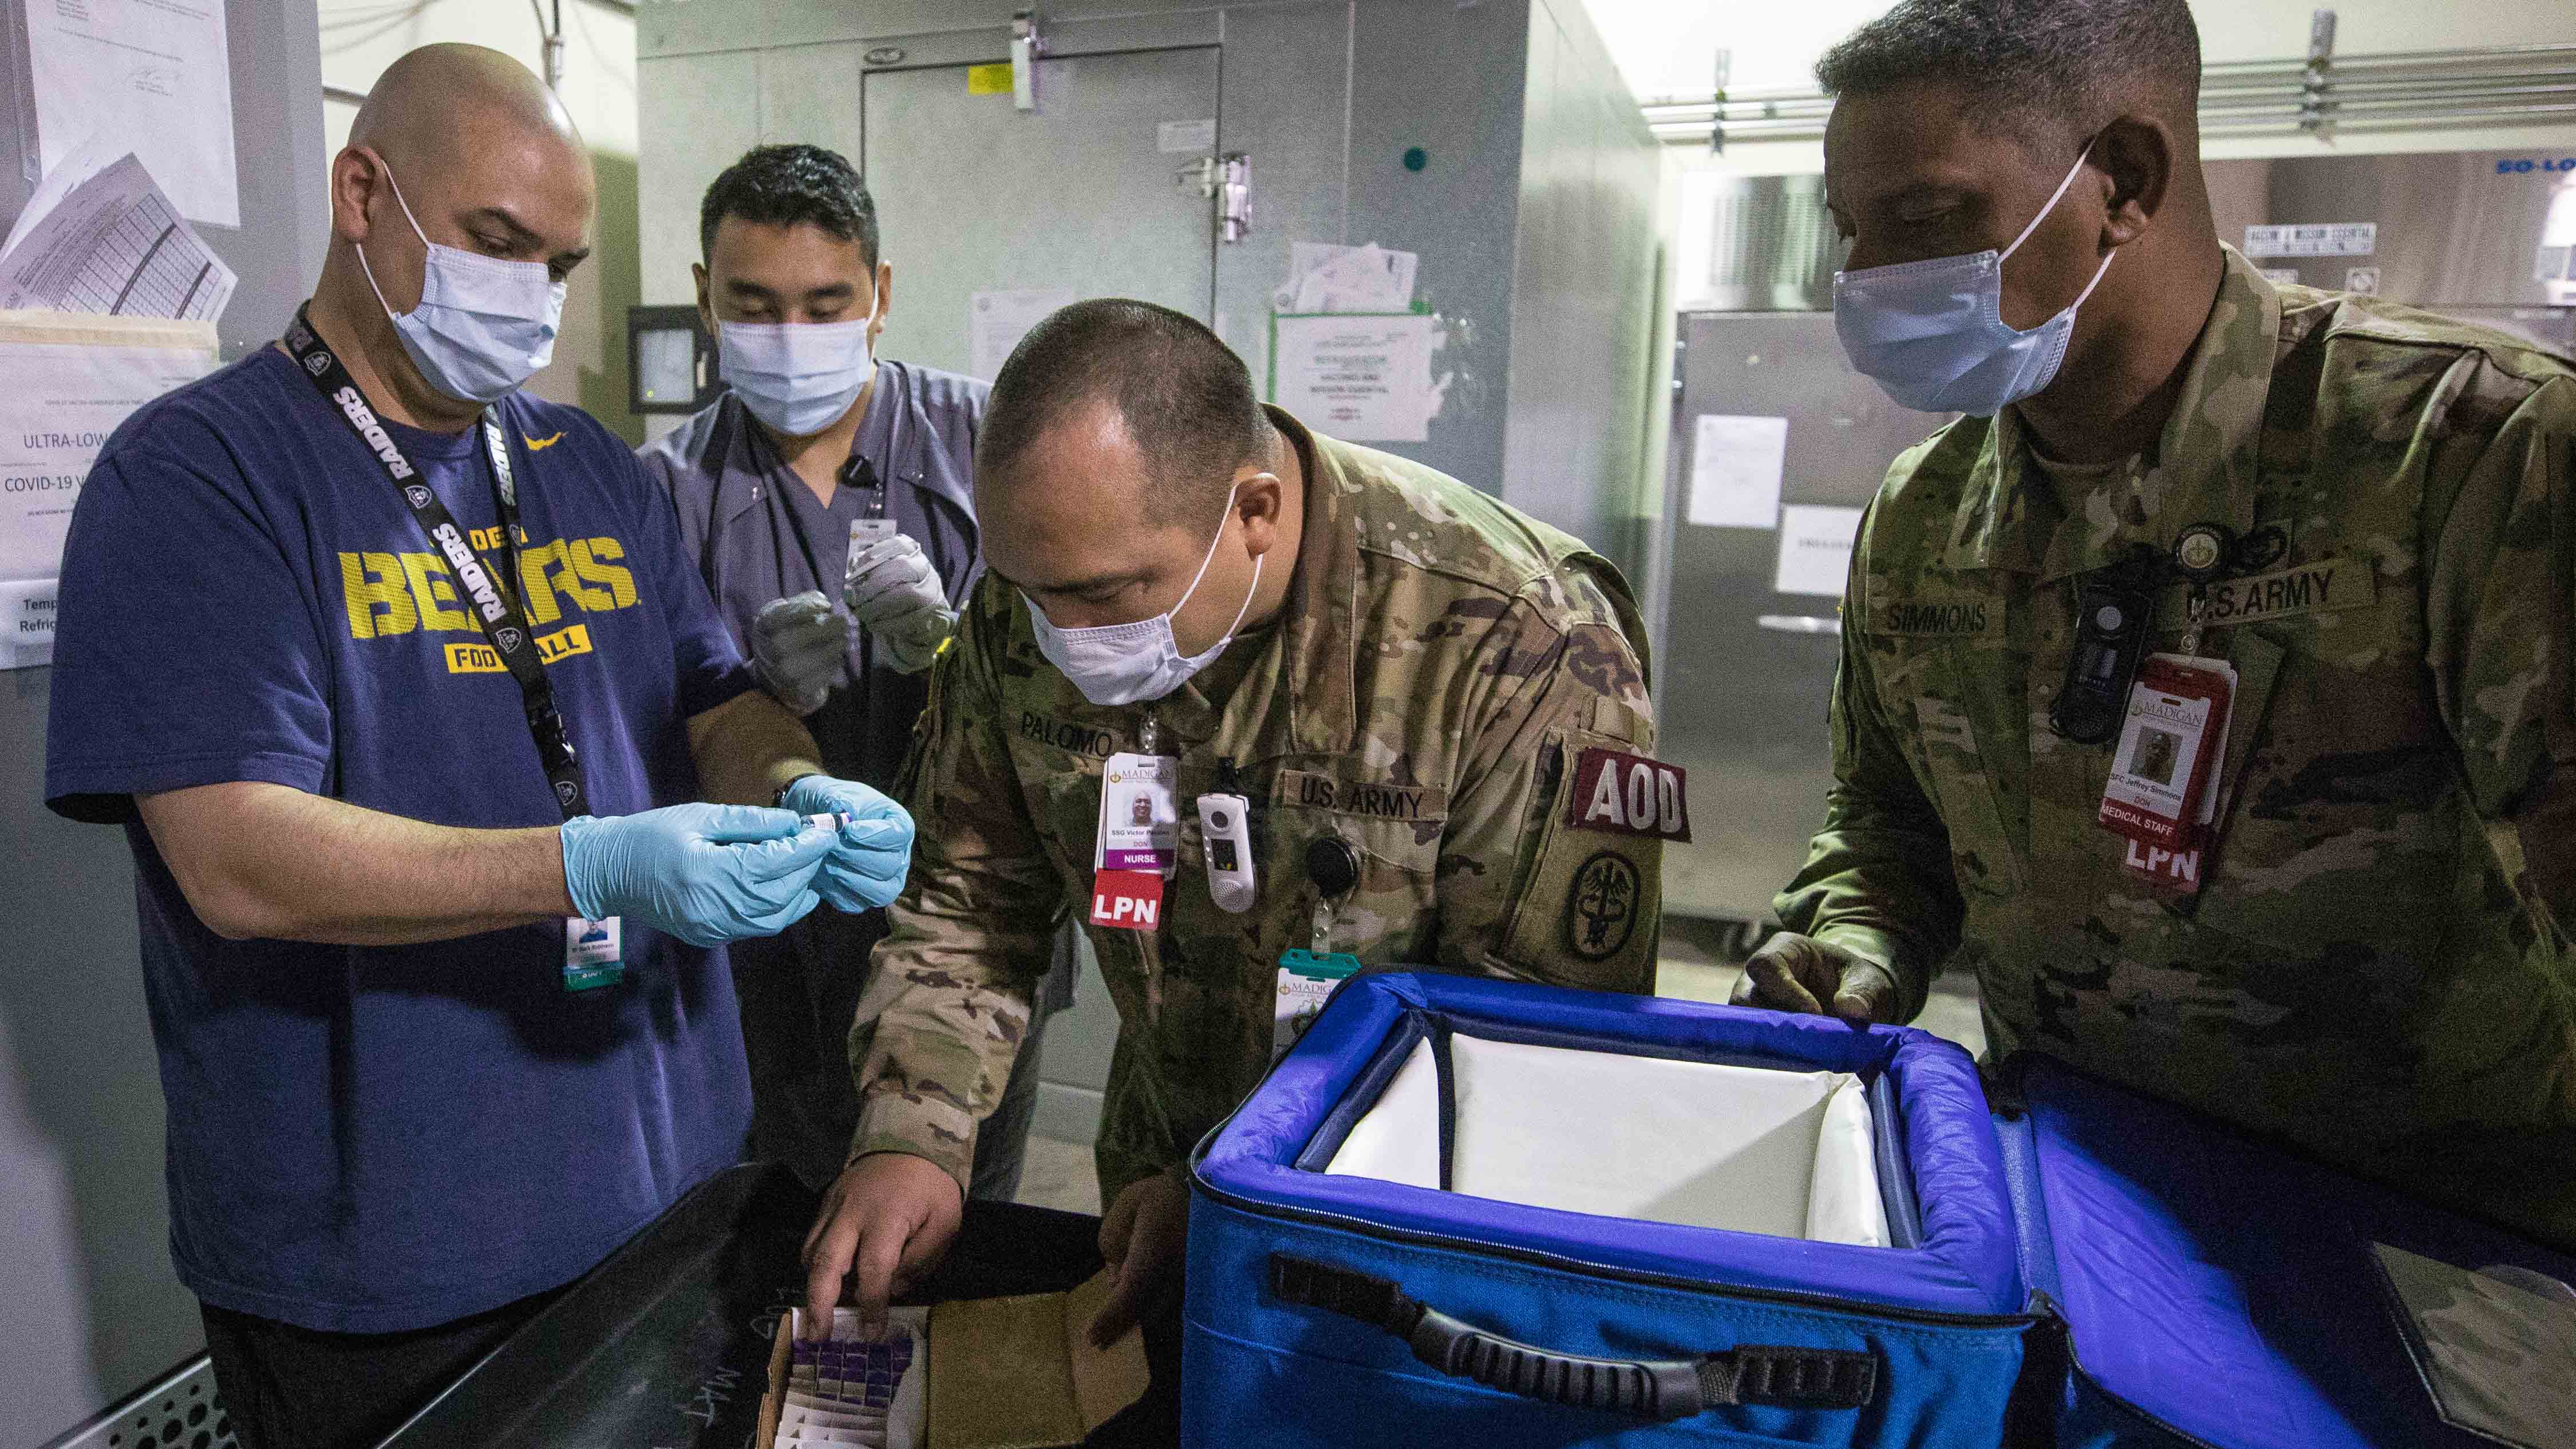 Soldiers aiding medical professionals